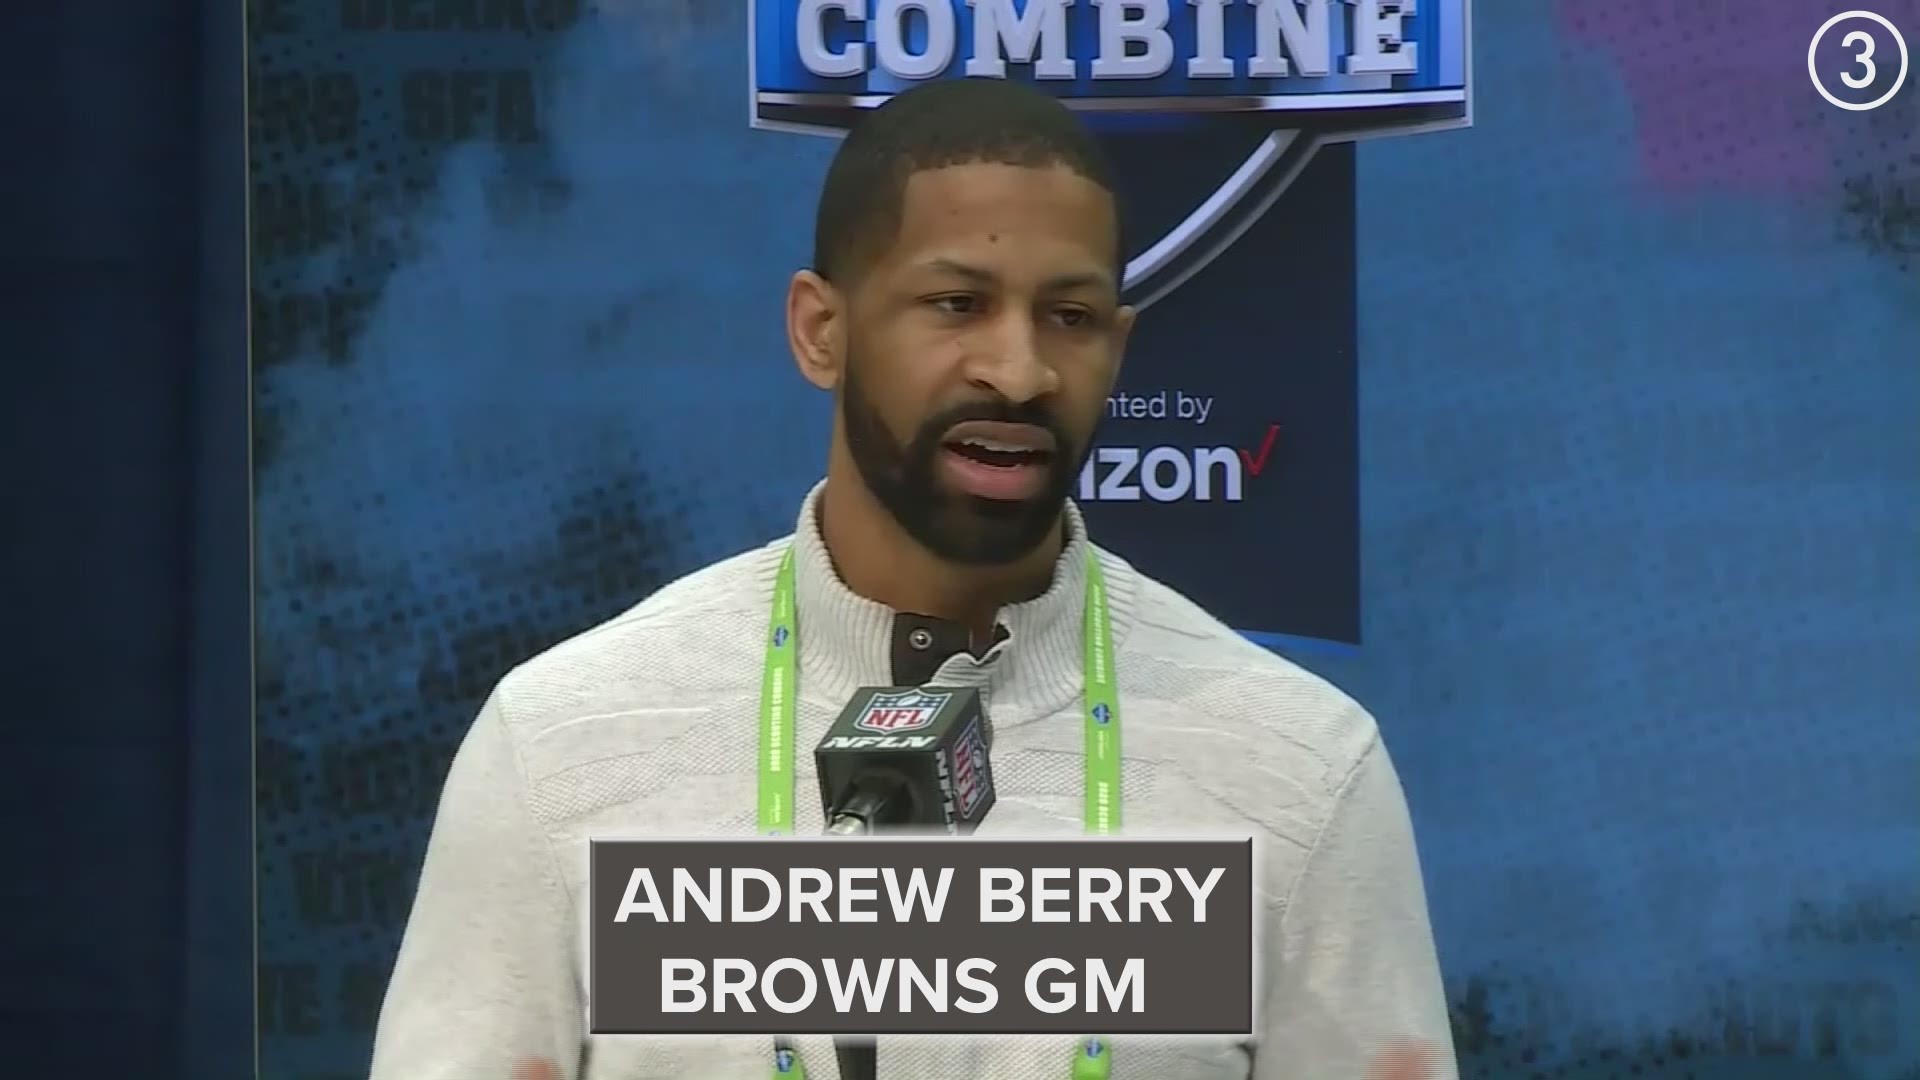 Good news for OBJ fans!  Cleveland Browns general manager Andrew Berry said at the NFL Scouting Combine that the teams views Odell Beckham Jr. as part of its future.